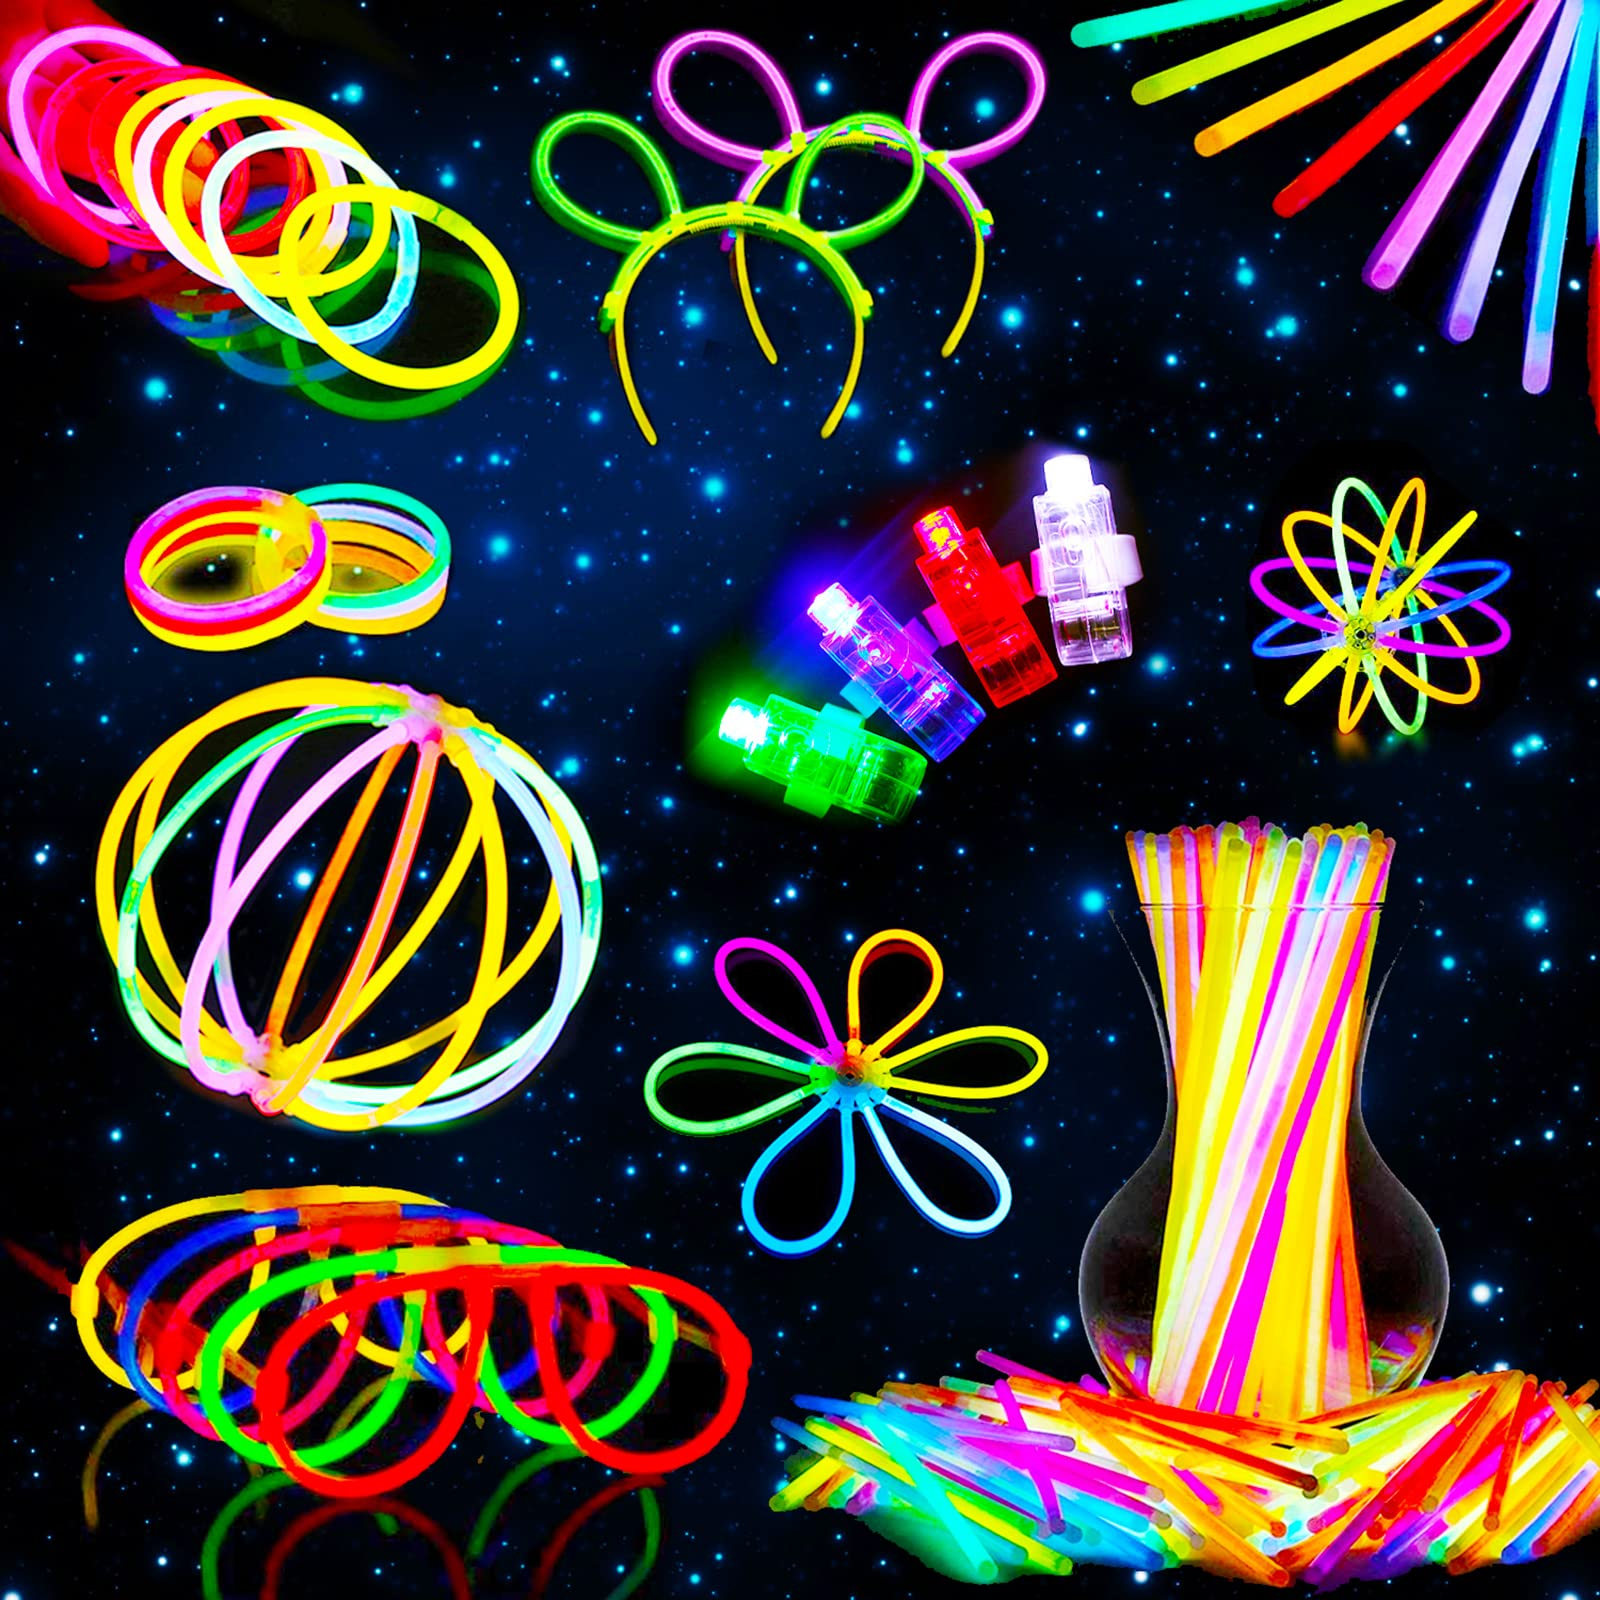 Birthday Glowing Bracelet Earring Colorful Lights Up Supplies for Parties Wedding Festival Eyeglasses Glow Sticks Party Pack with Connectors 